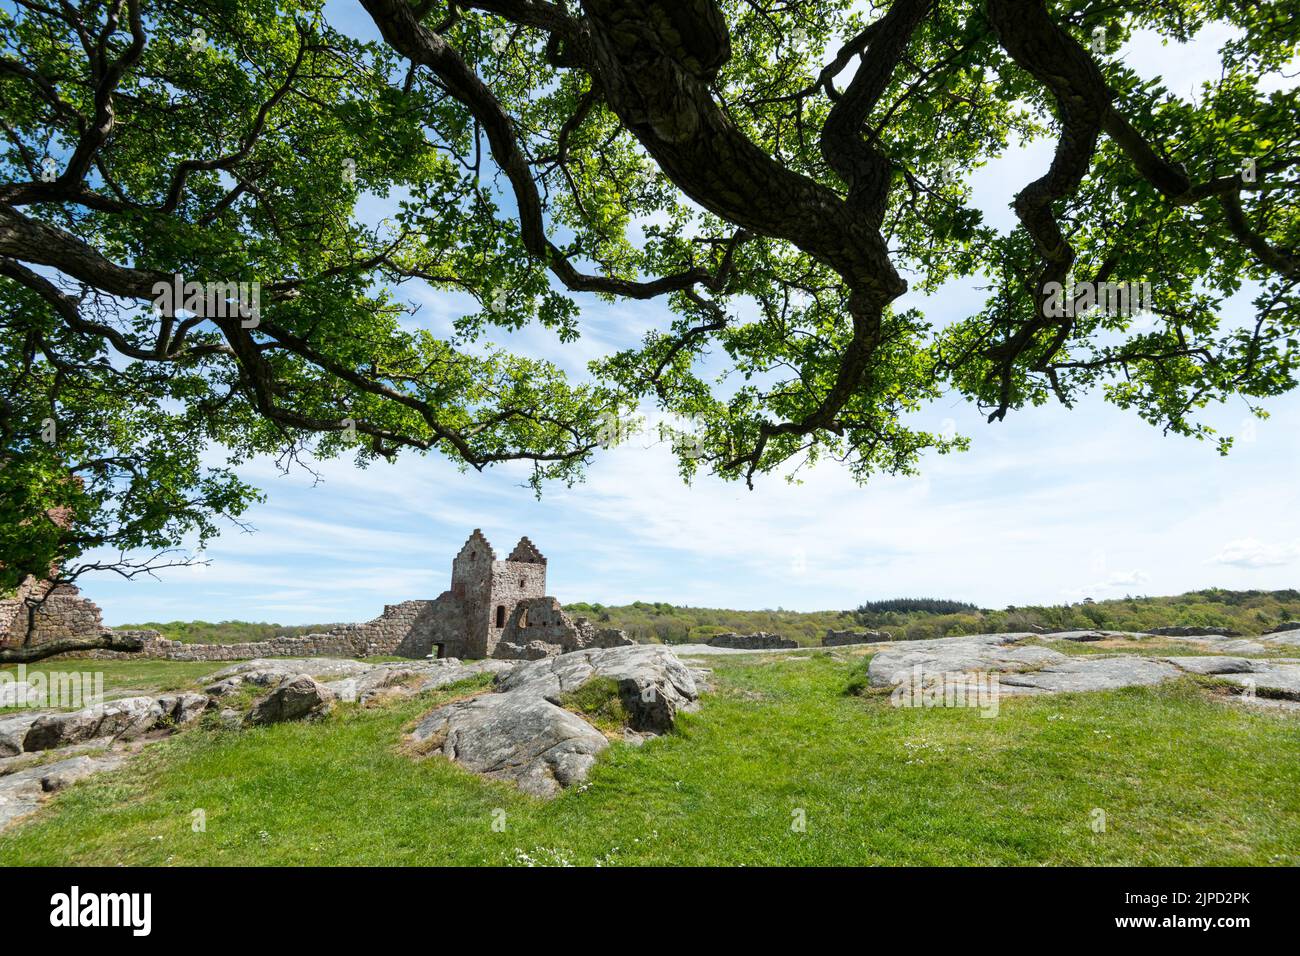 Hammershus is a medieval fortification on the northern tip of the Danish island of Bornholm. Stock Photo